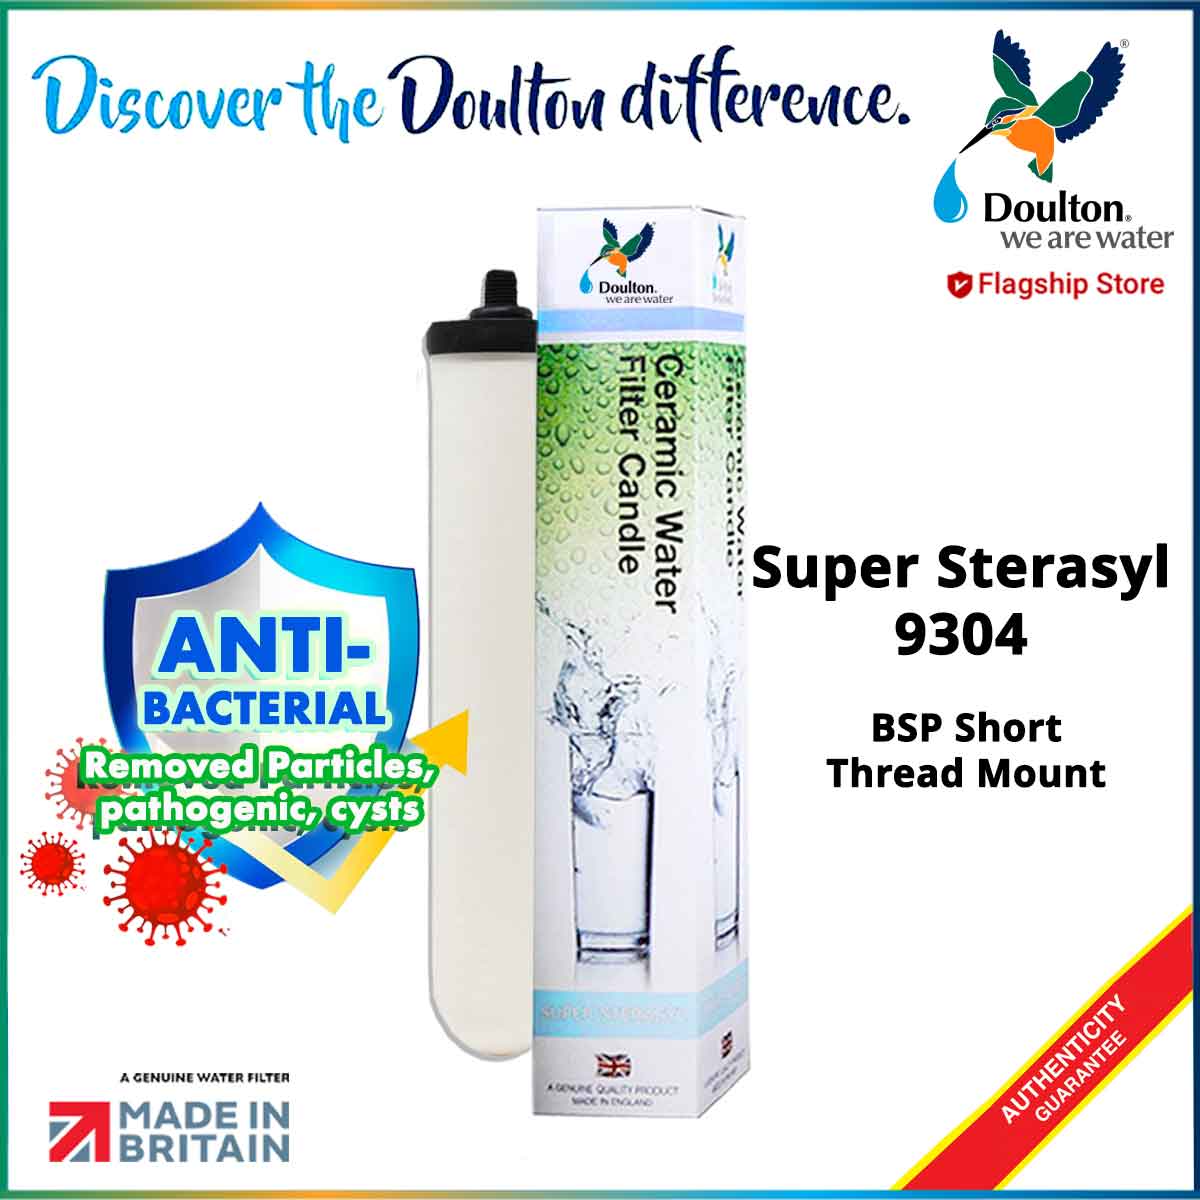 Doulton Super Sterasyl 9304 Ceramic Water Filter Candle (BSP Short Thread Mount) / with SS101 Push Fit Housing